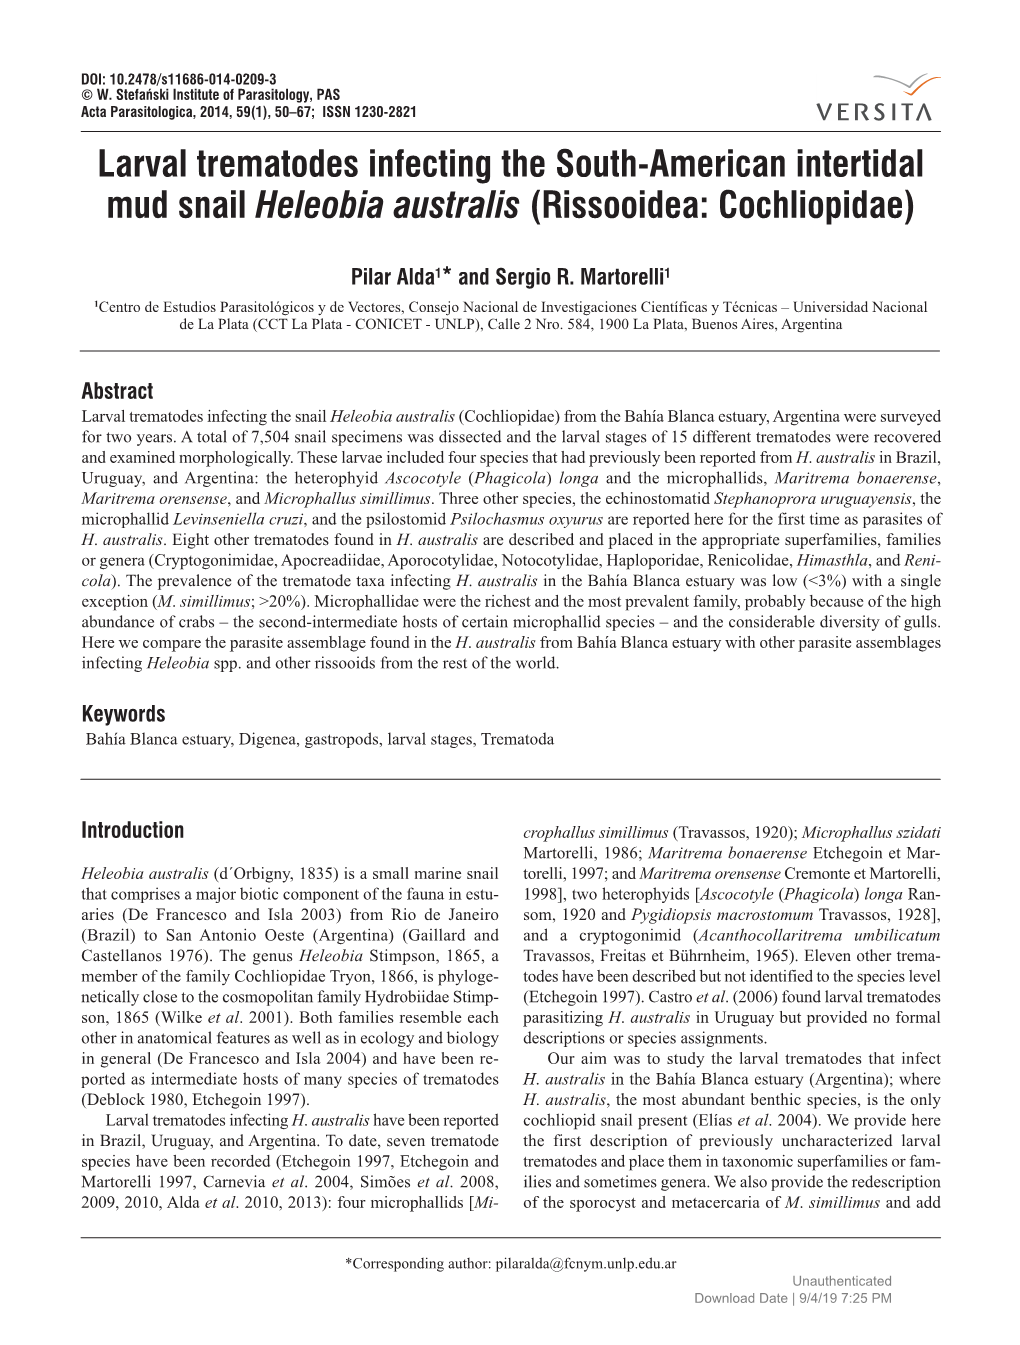 Larval Trematodes Infecting the South-American Intertidal Mud Snail Heleobia Australis (Rissooidea: Cochliopidae)